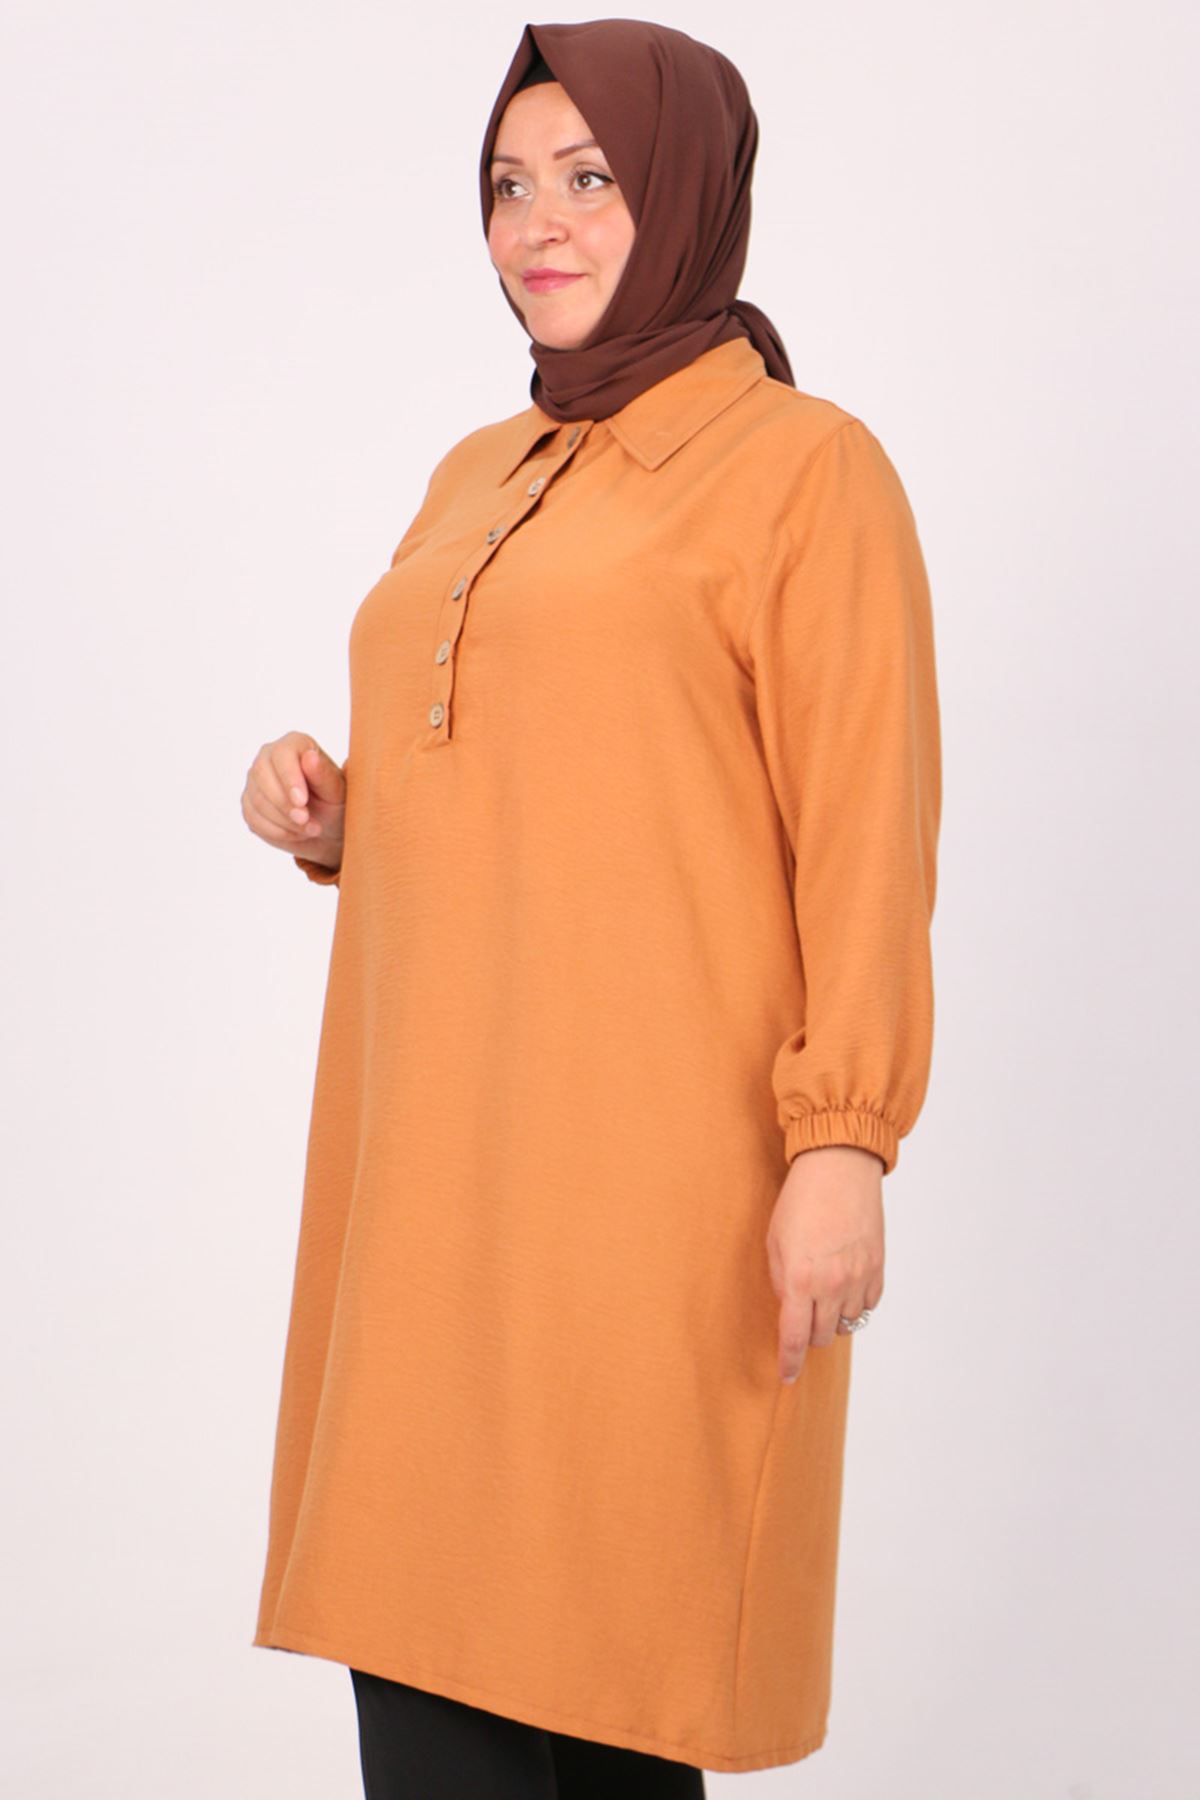 28053 Plus Size Miracle Tunic with Front Patties -Onion Peel